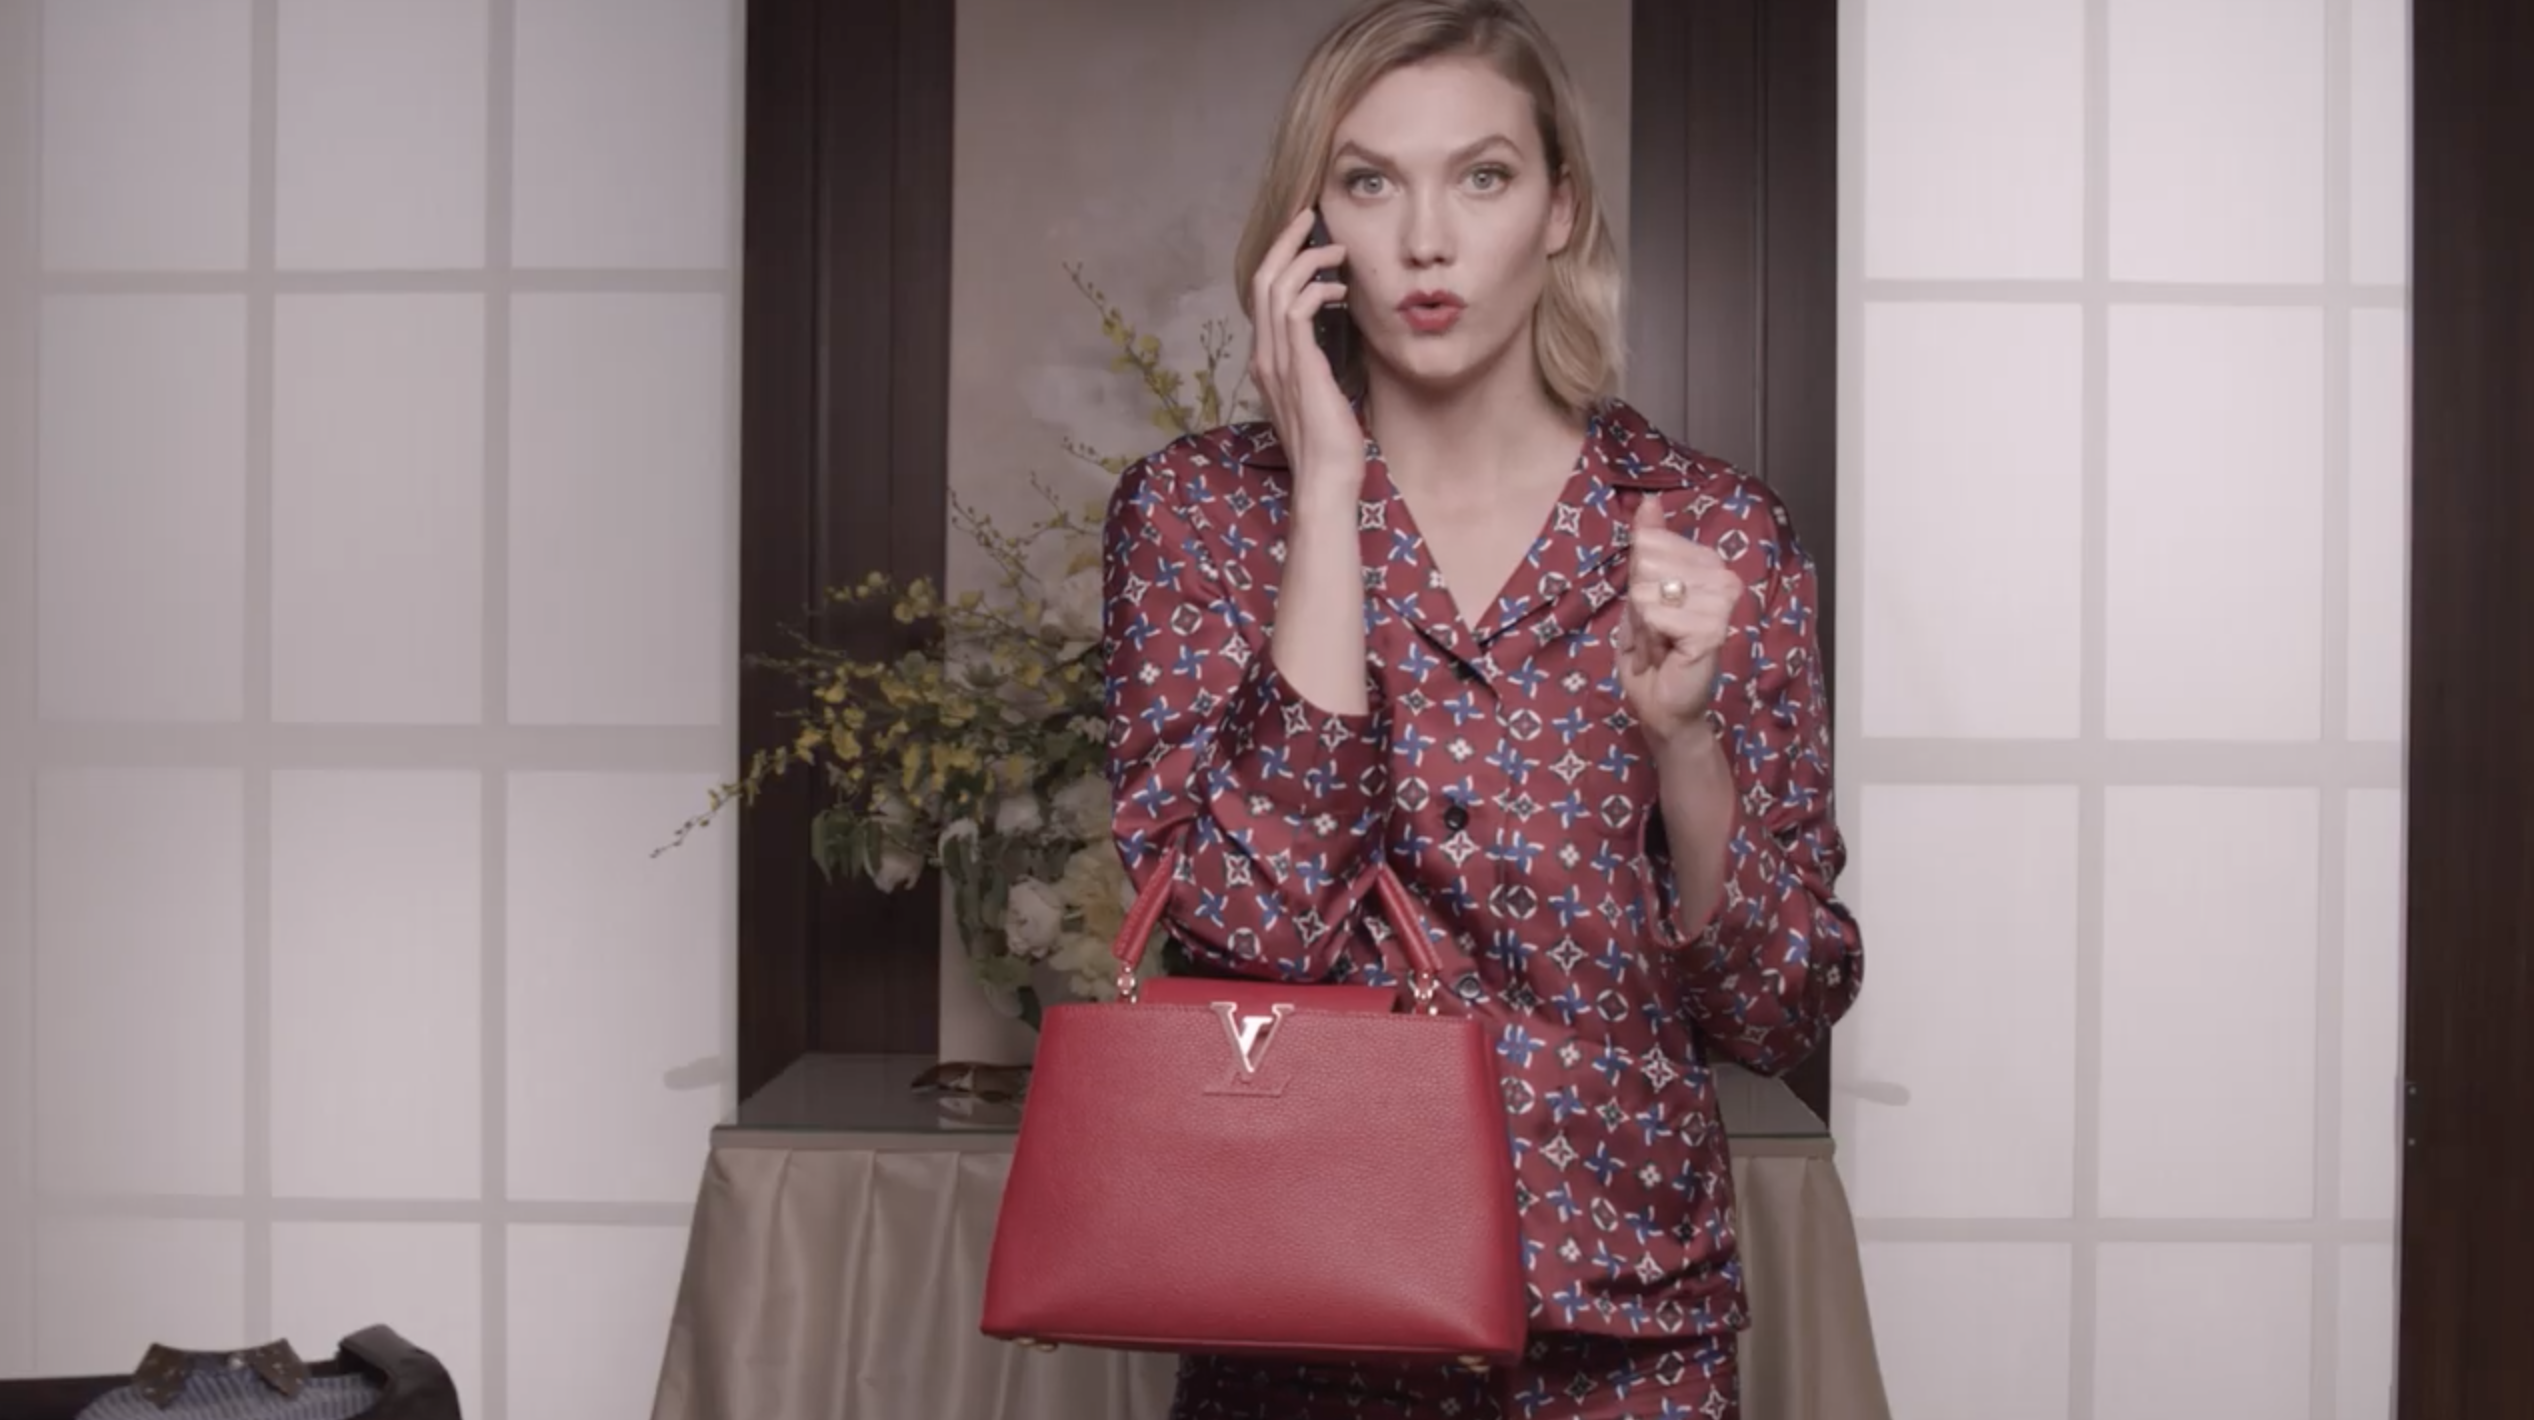 Louis Vuitton Capucines Summer 2019 Ad Campaign with Karlie Kloss